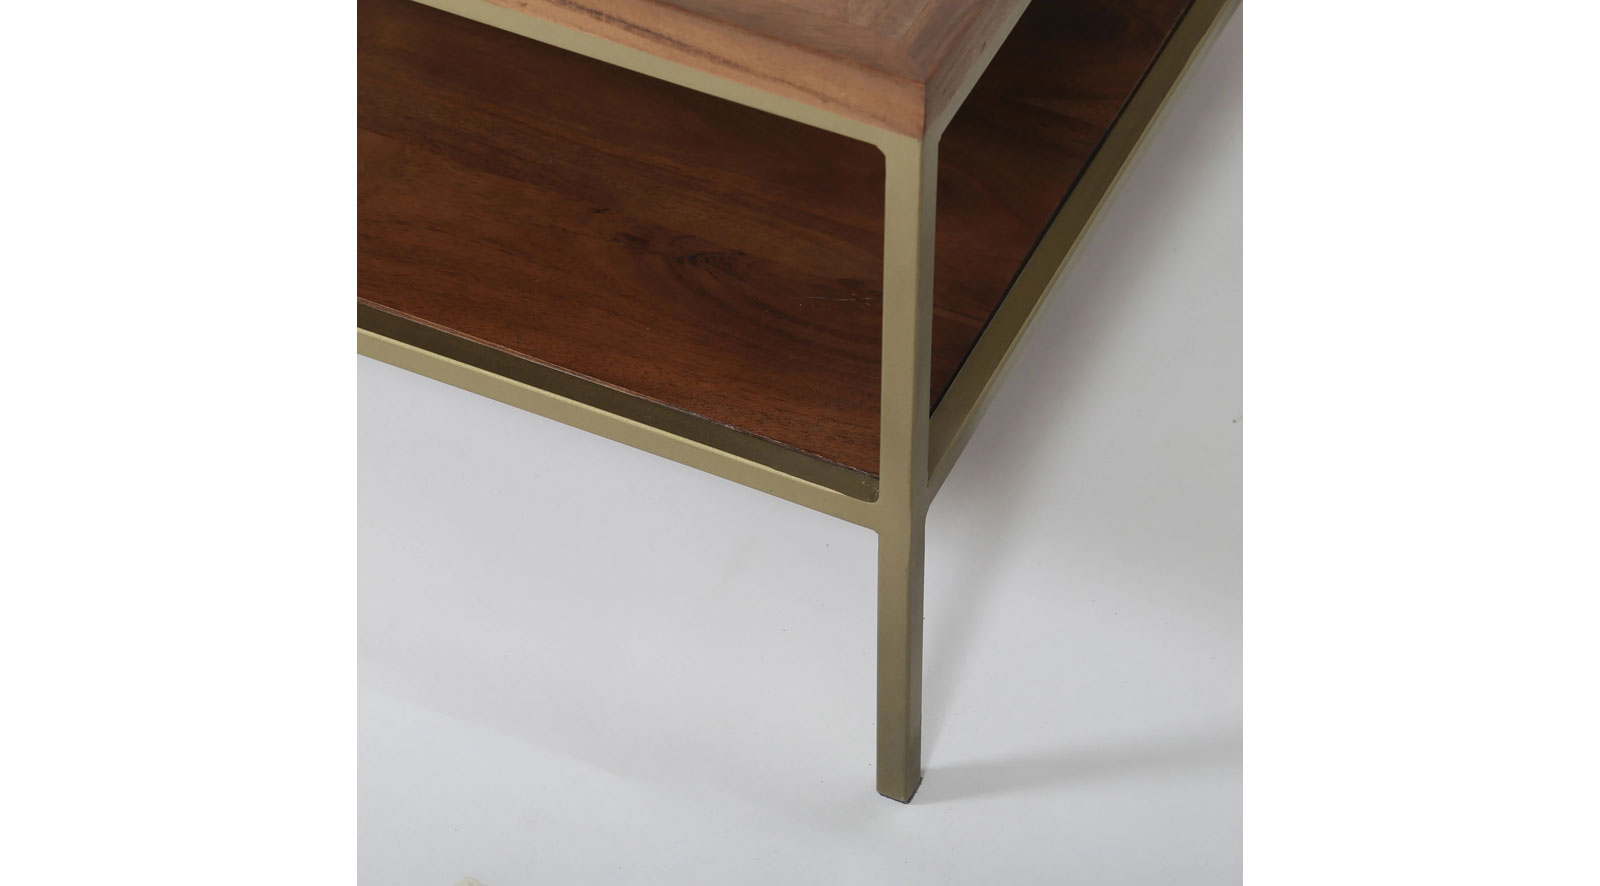 gonzo-coffee-table-8